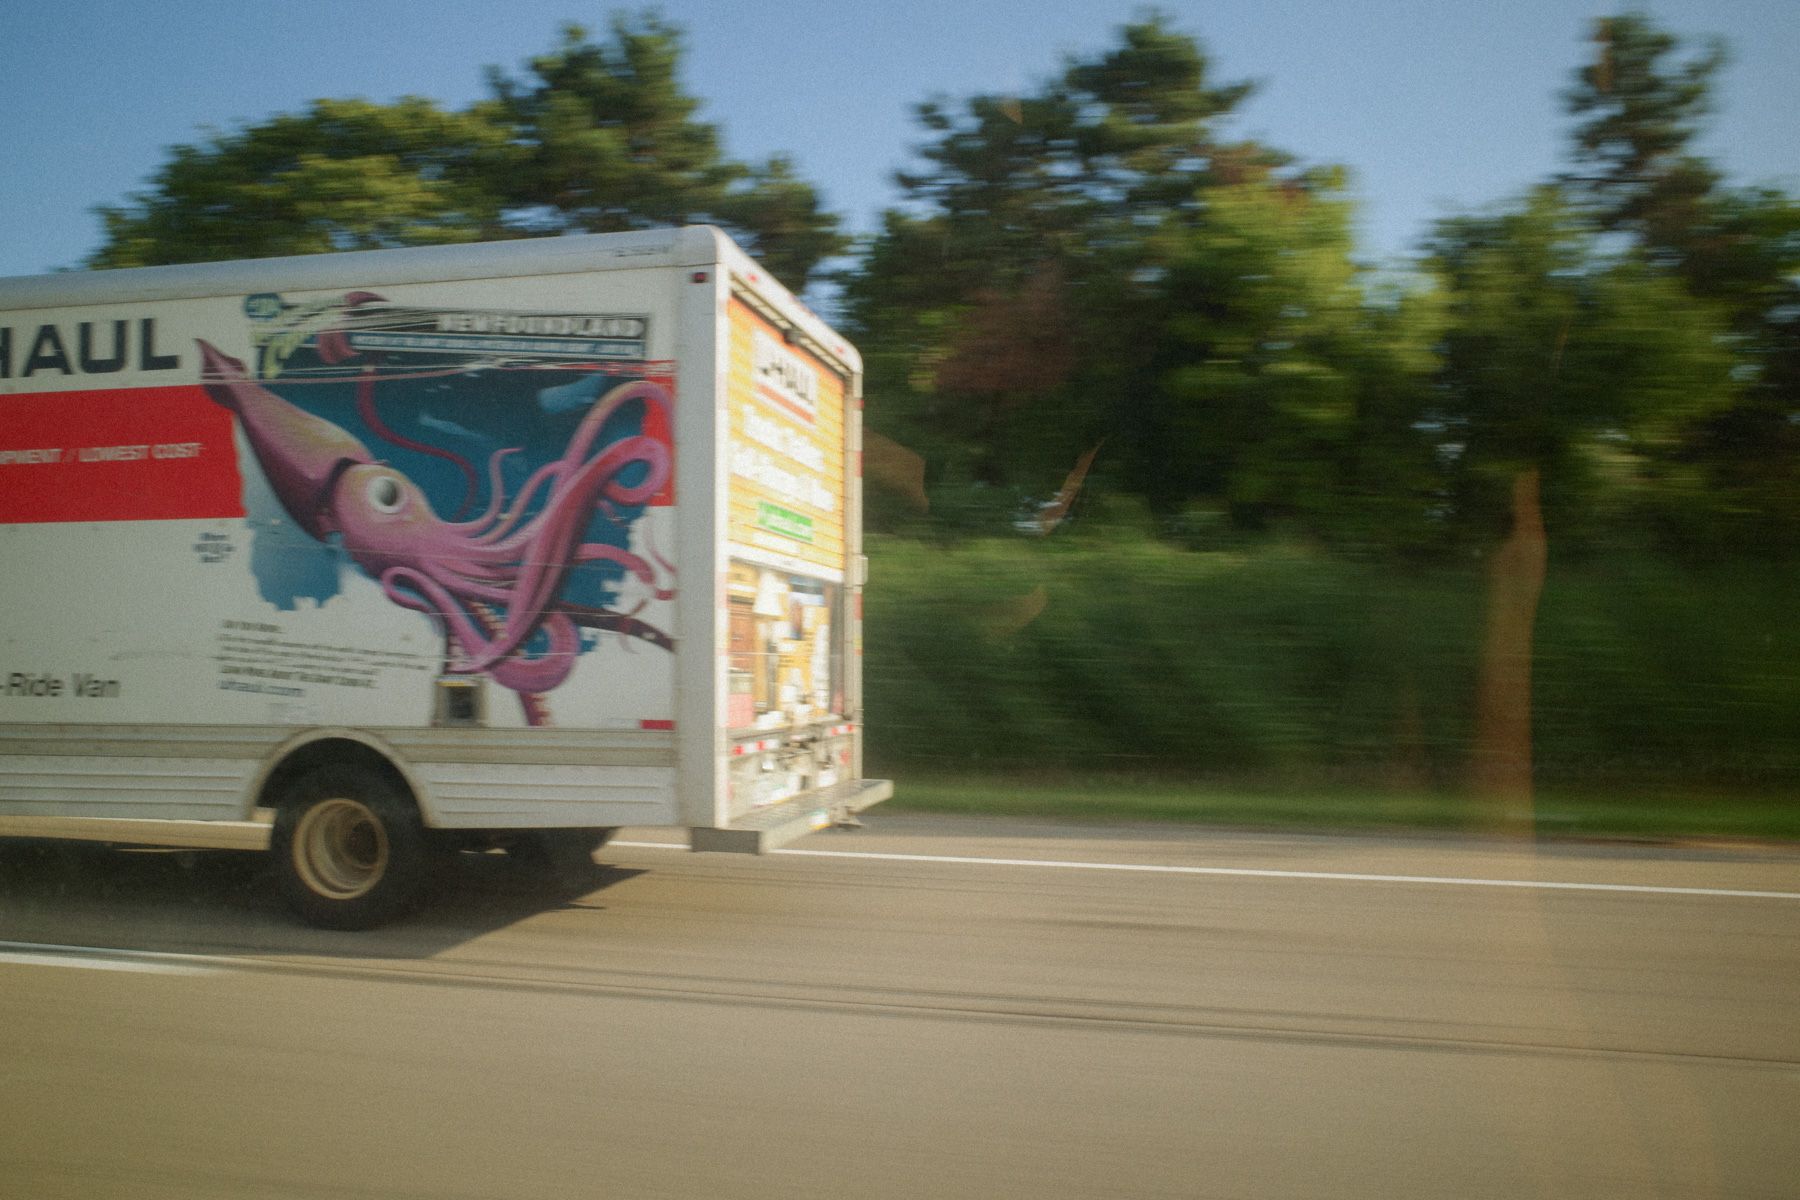 Rear end of U-Haul truck with squid graphics, shot from moving car, blurry trees whizzing by.